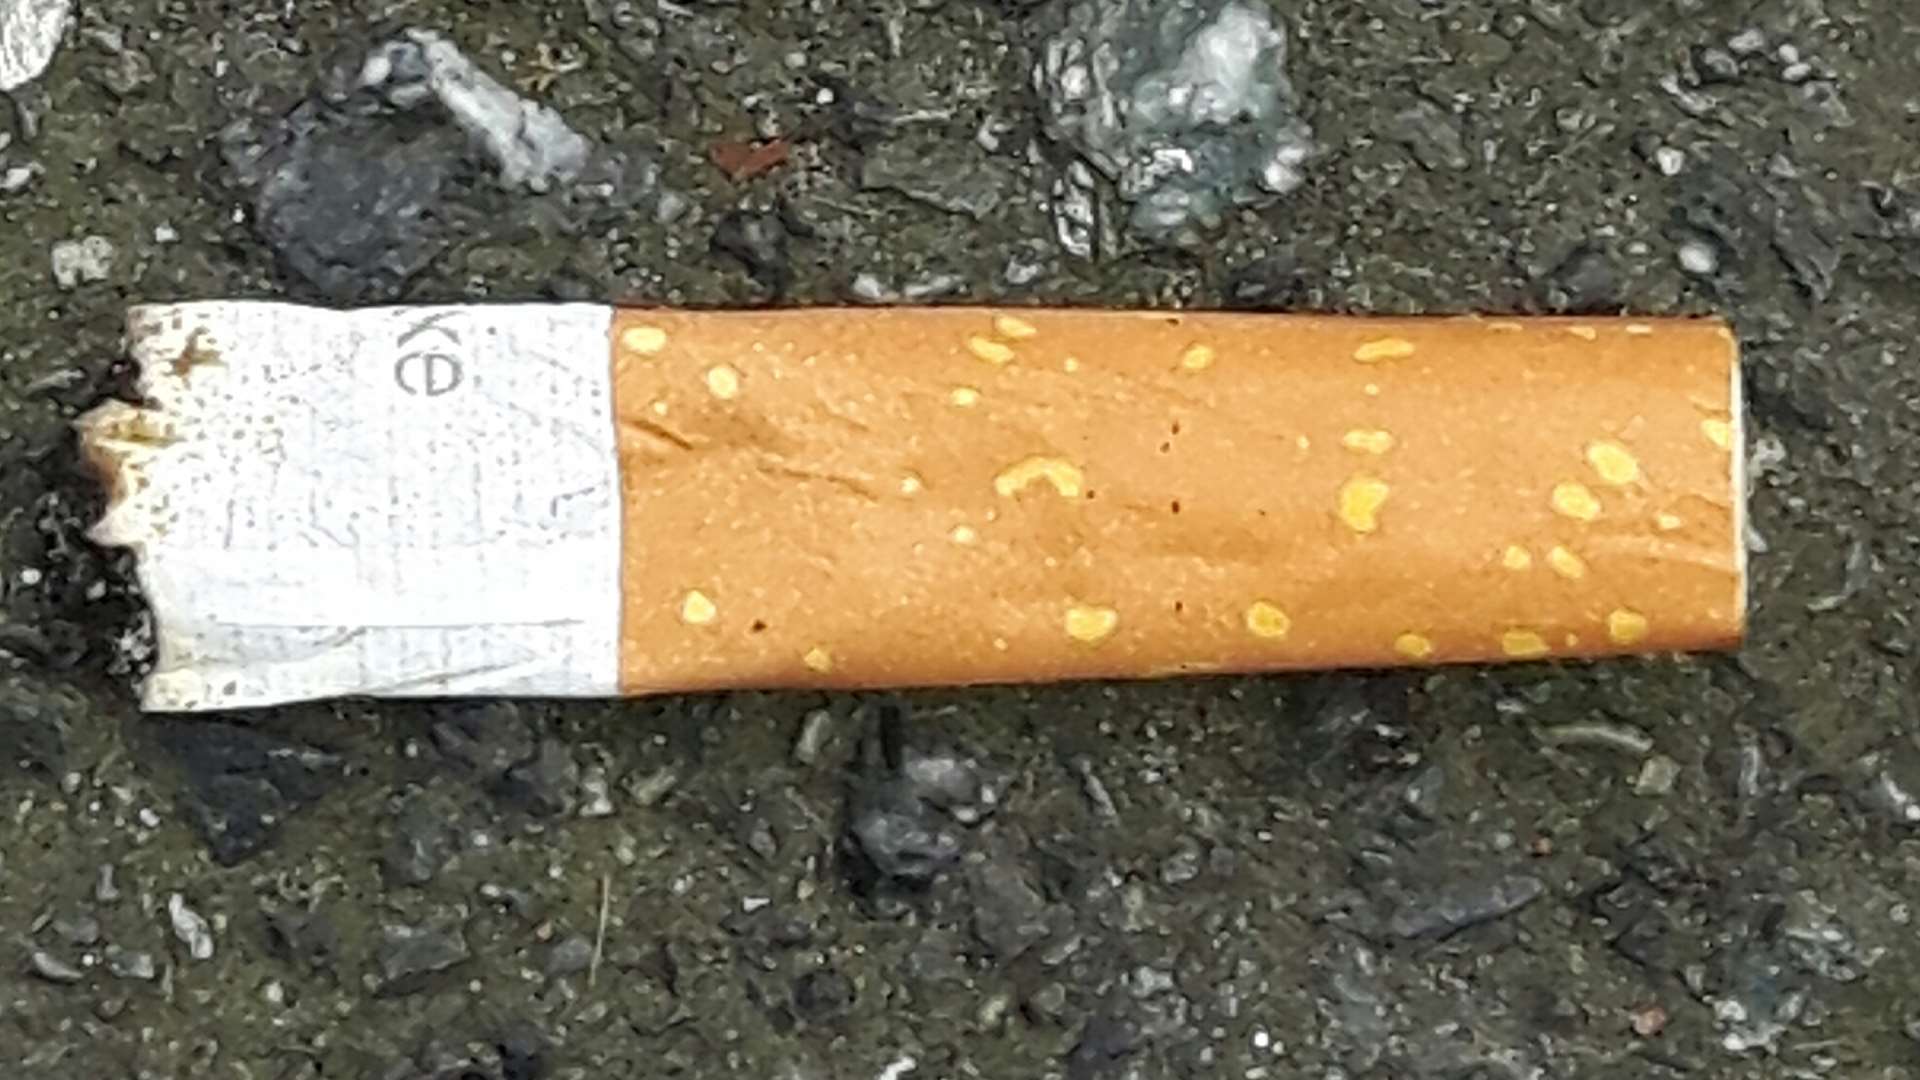 Seven fined for cigarette littering. Library image